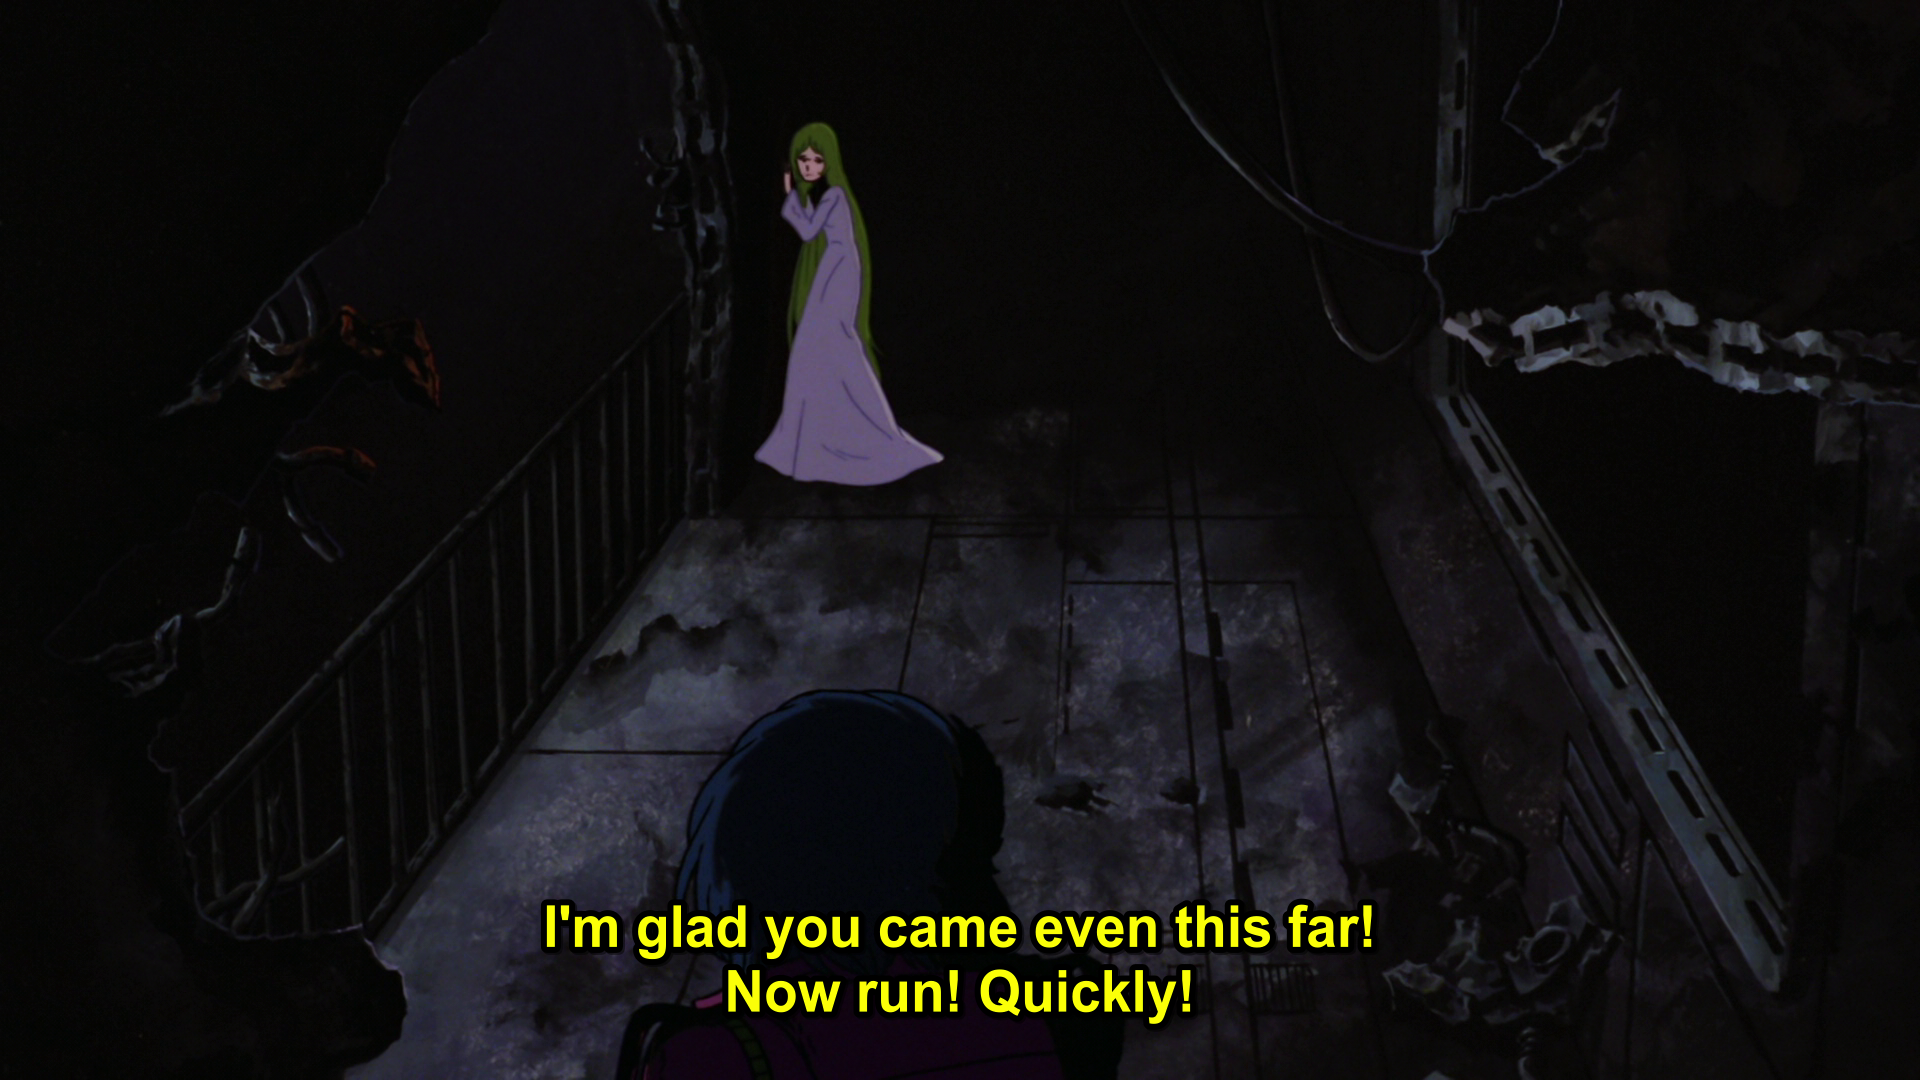 Maya across from Harlock, hiding from the illumidas and saying I'm glad you even came this far! Now run! Quickly!